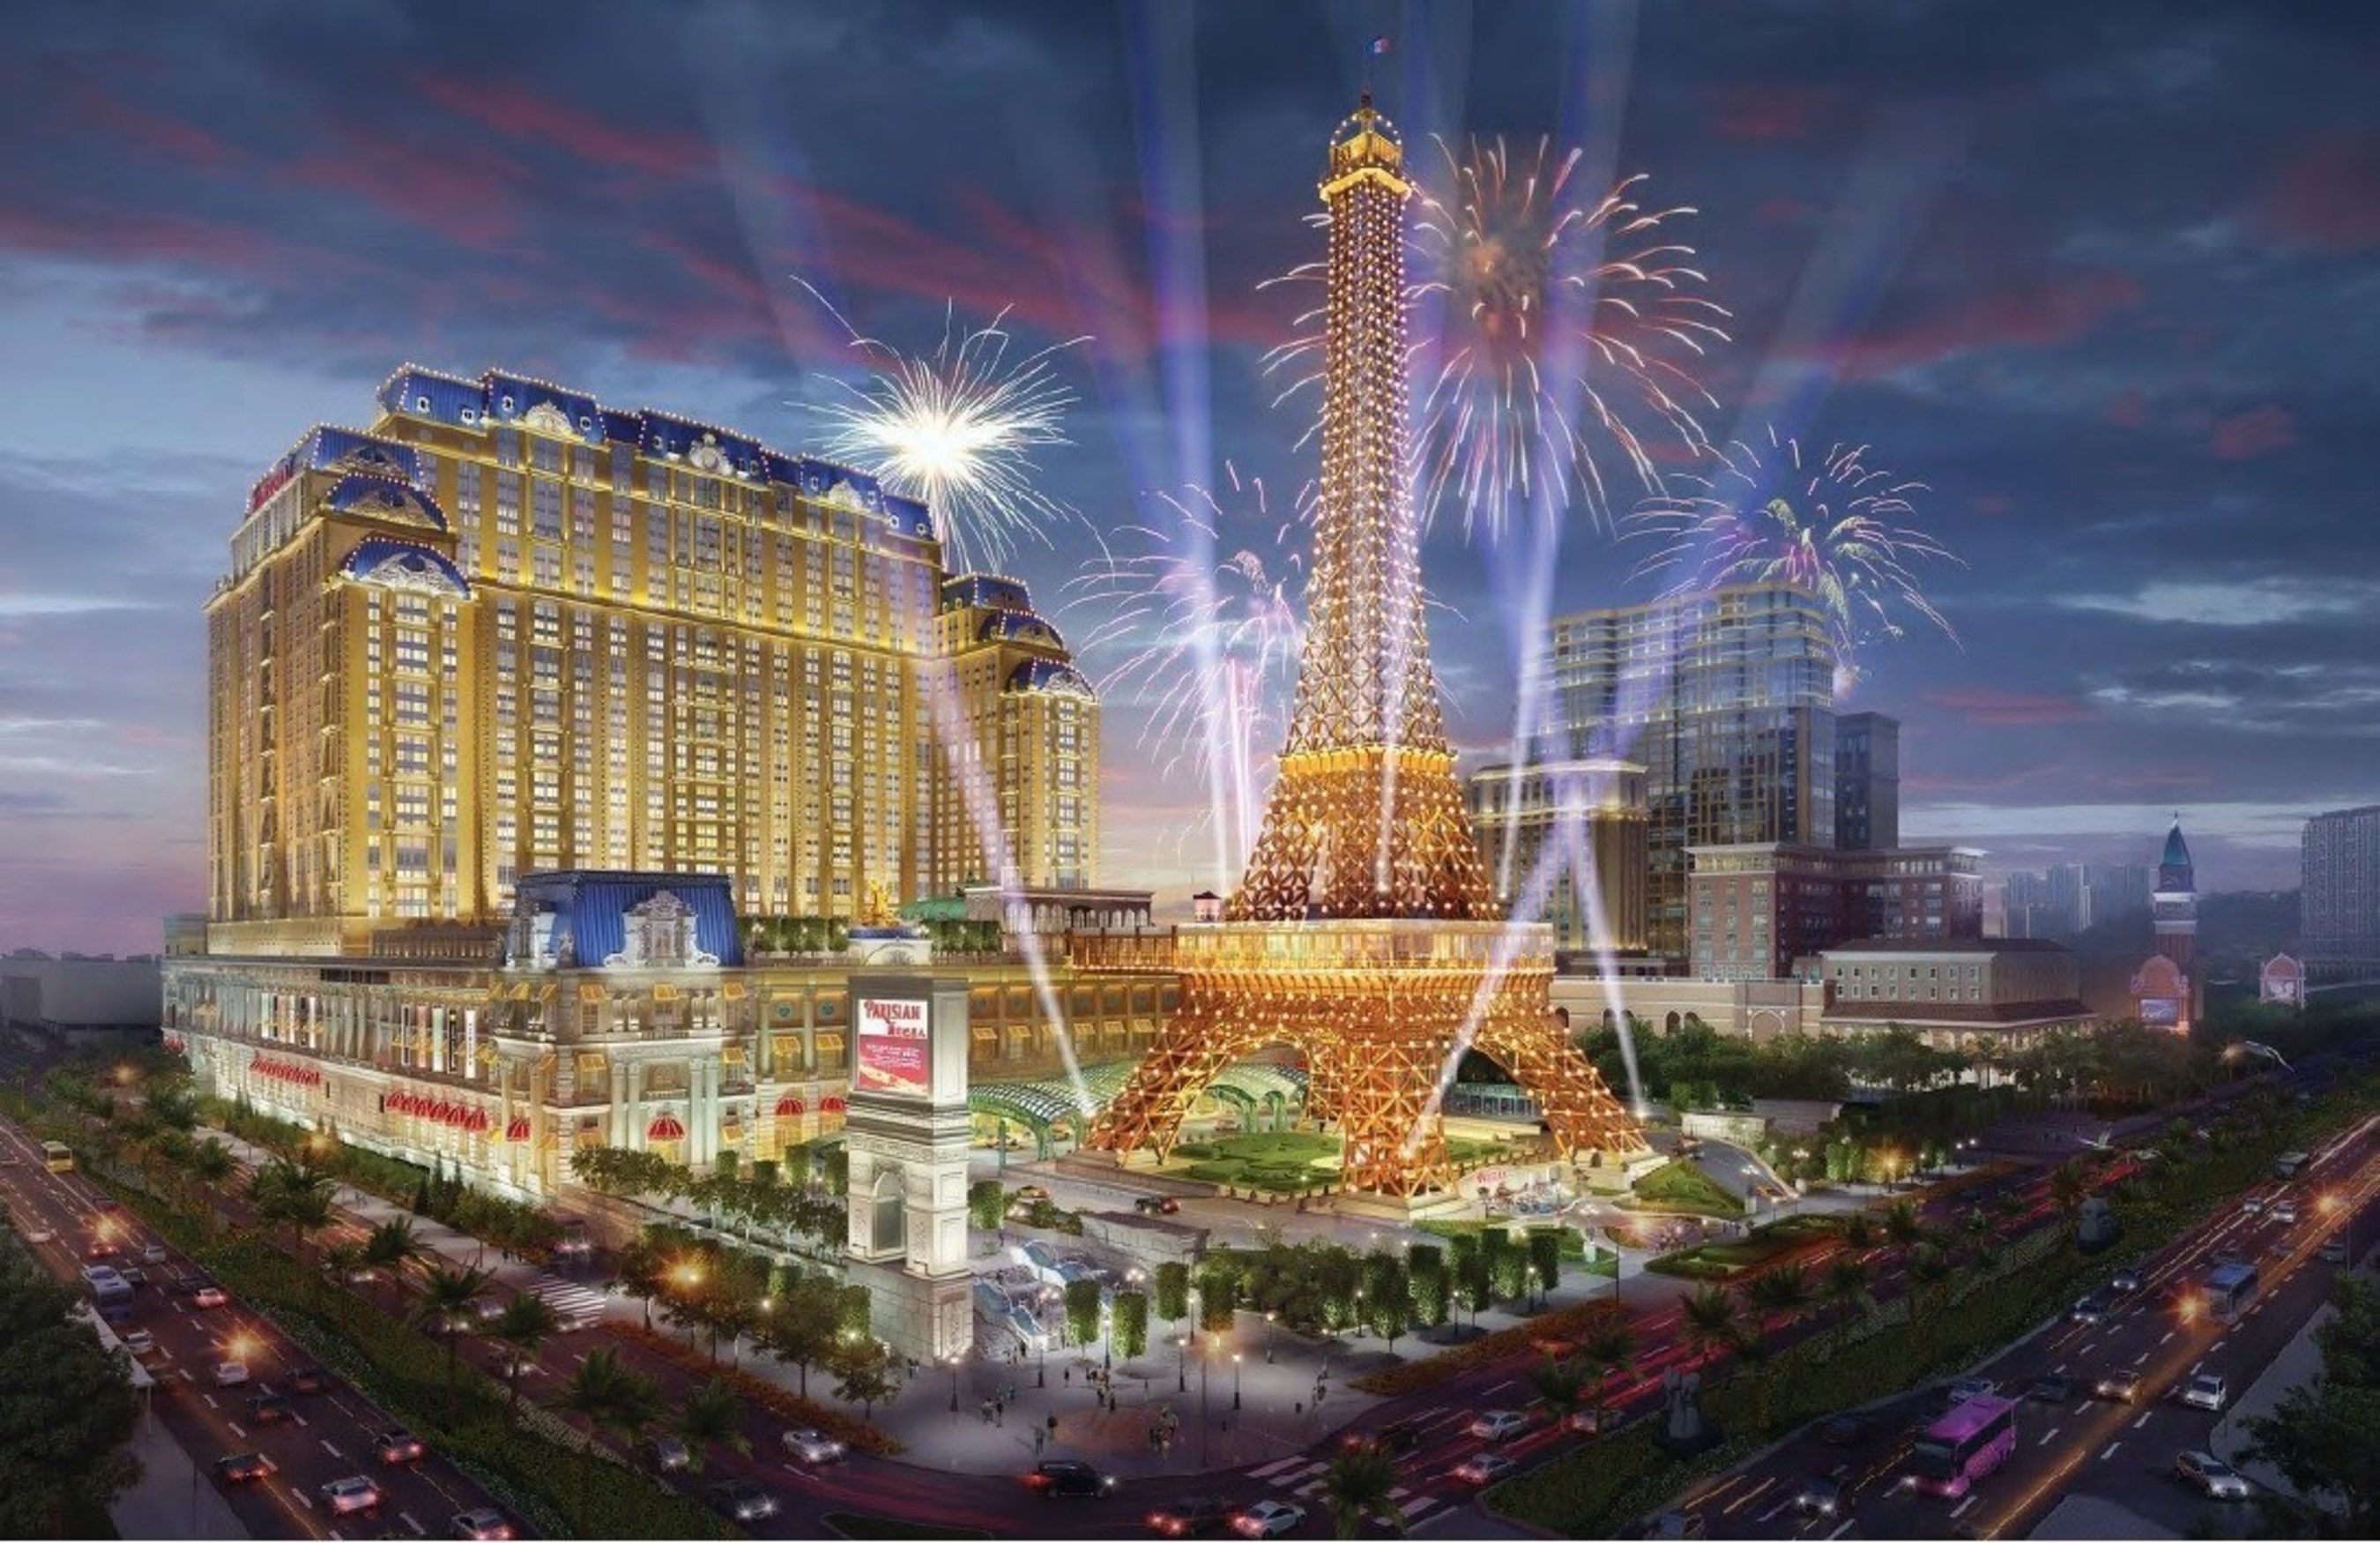 The Parisian Macao, the jewel in the Sands China’s crown, is set to open in Macao in the late 2016, bringing the magic and wonder of the famed “City of Light” to Macao.